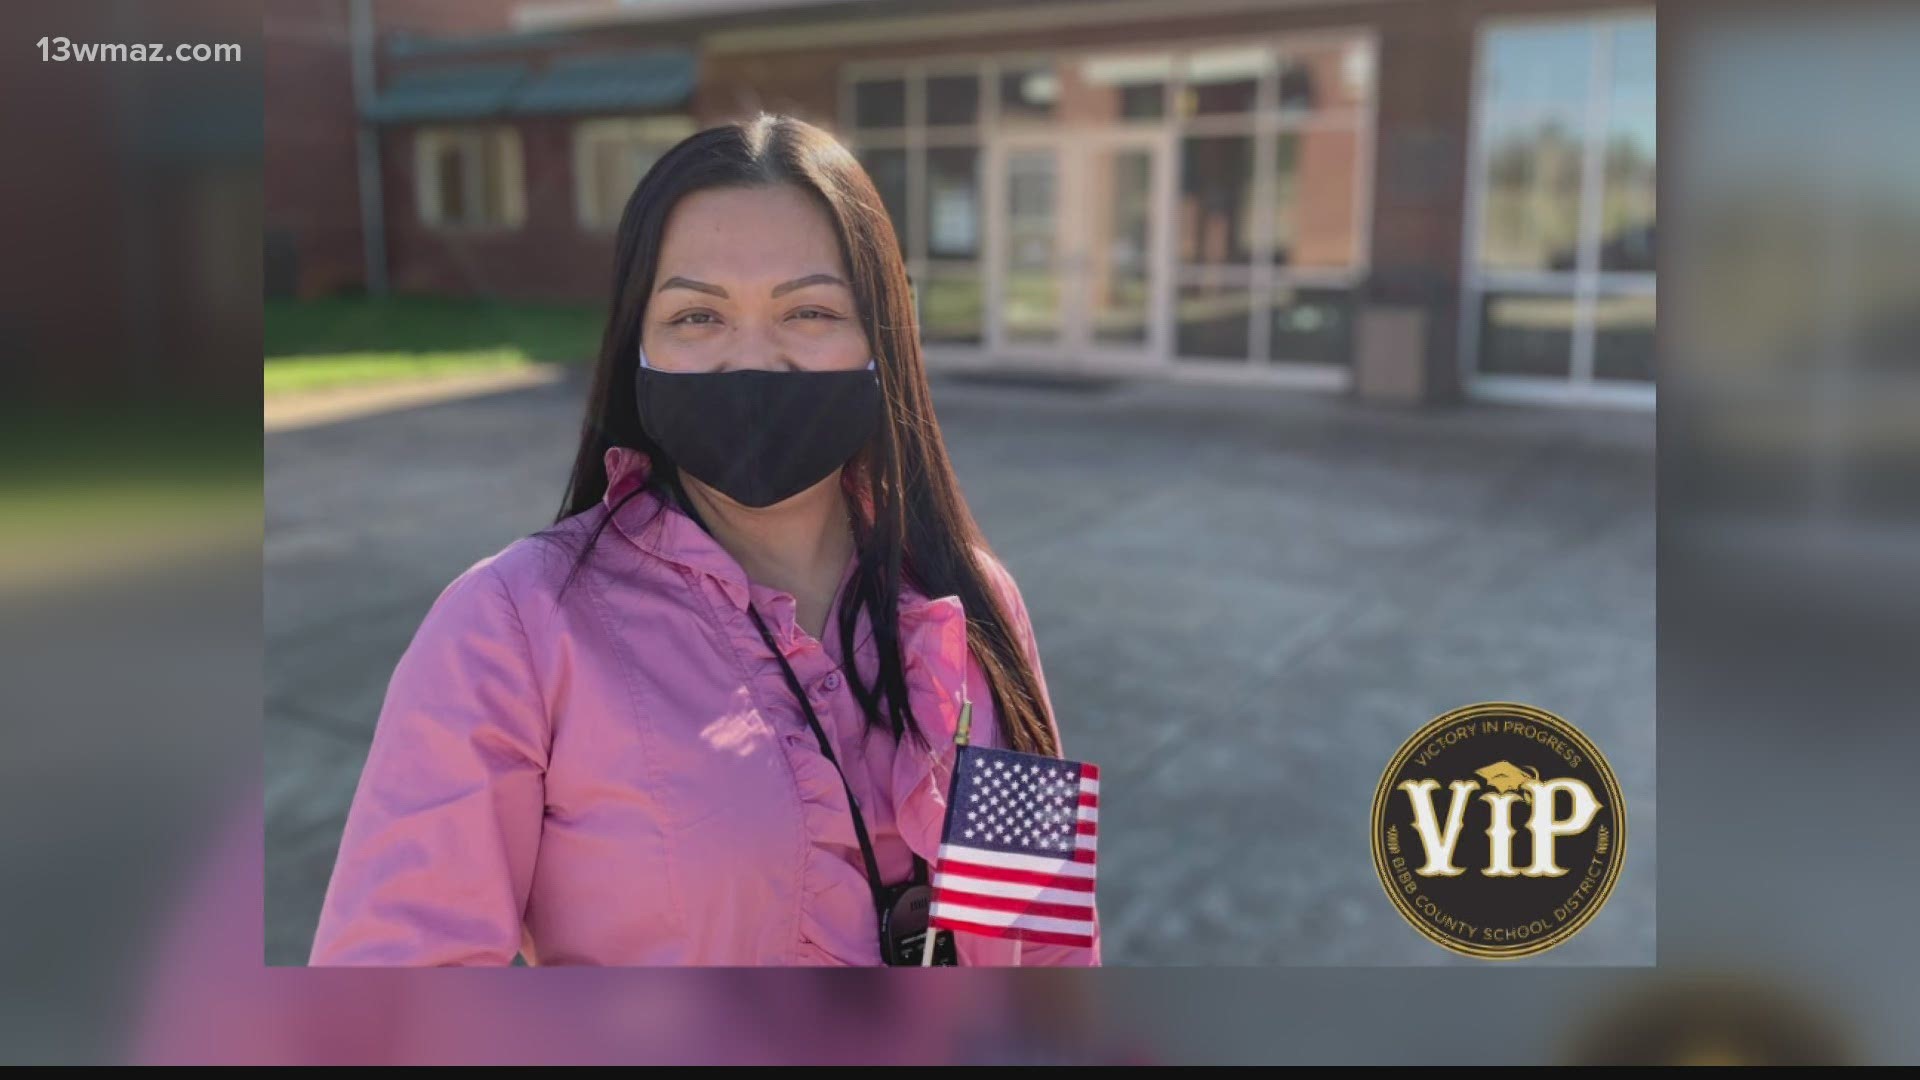 Biology teacher Marissa Rondina, who came to America from the Philippines 14 years ago, earned her US citizenship on Friday.